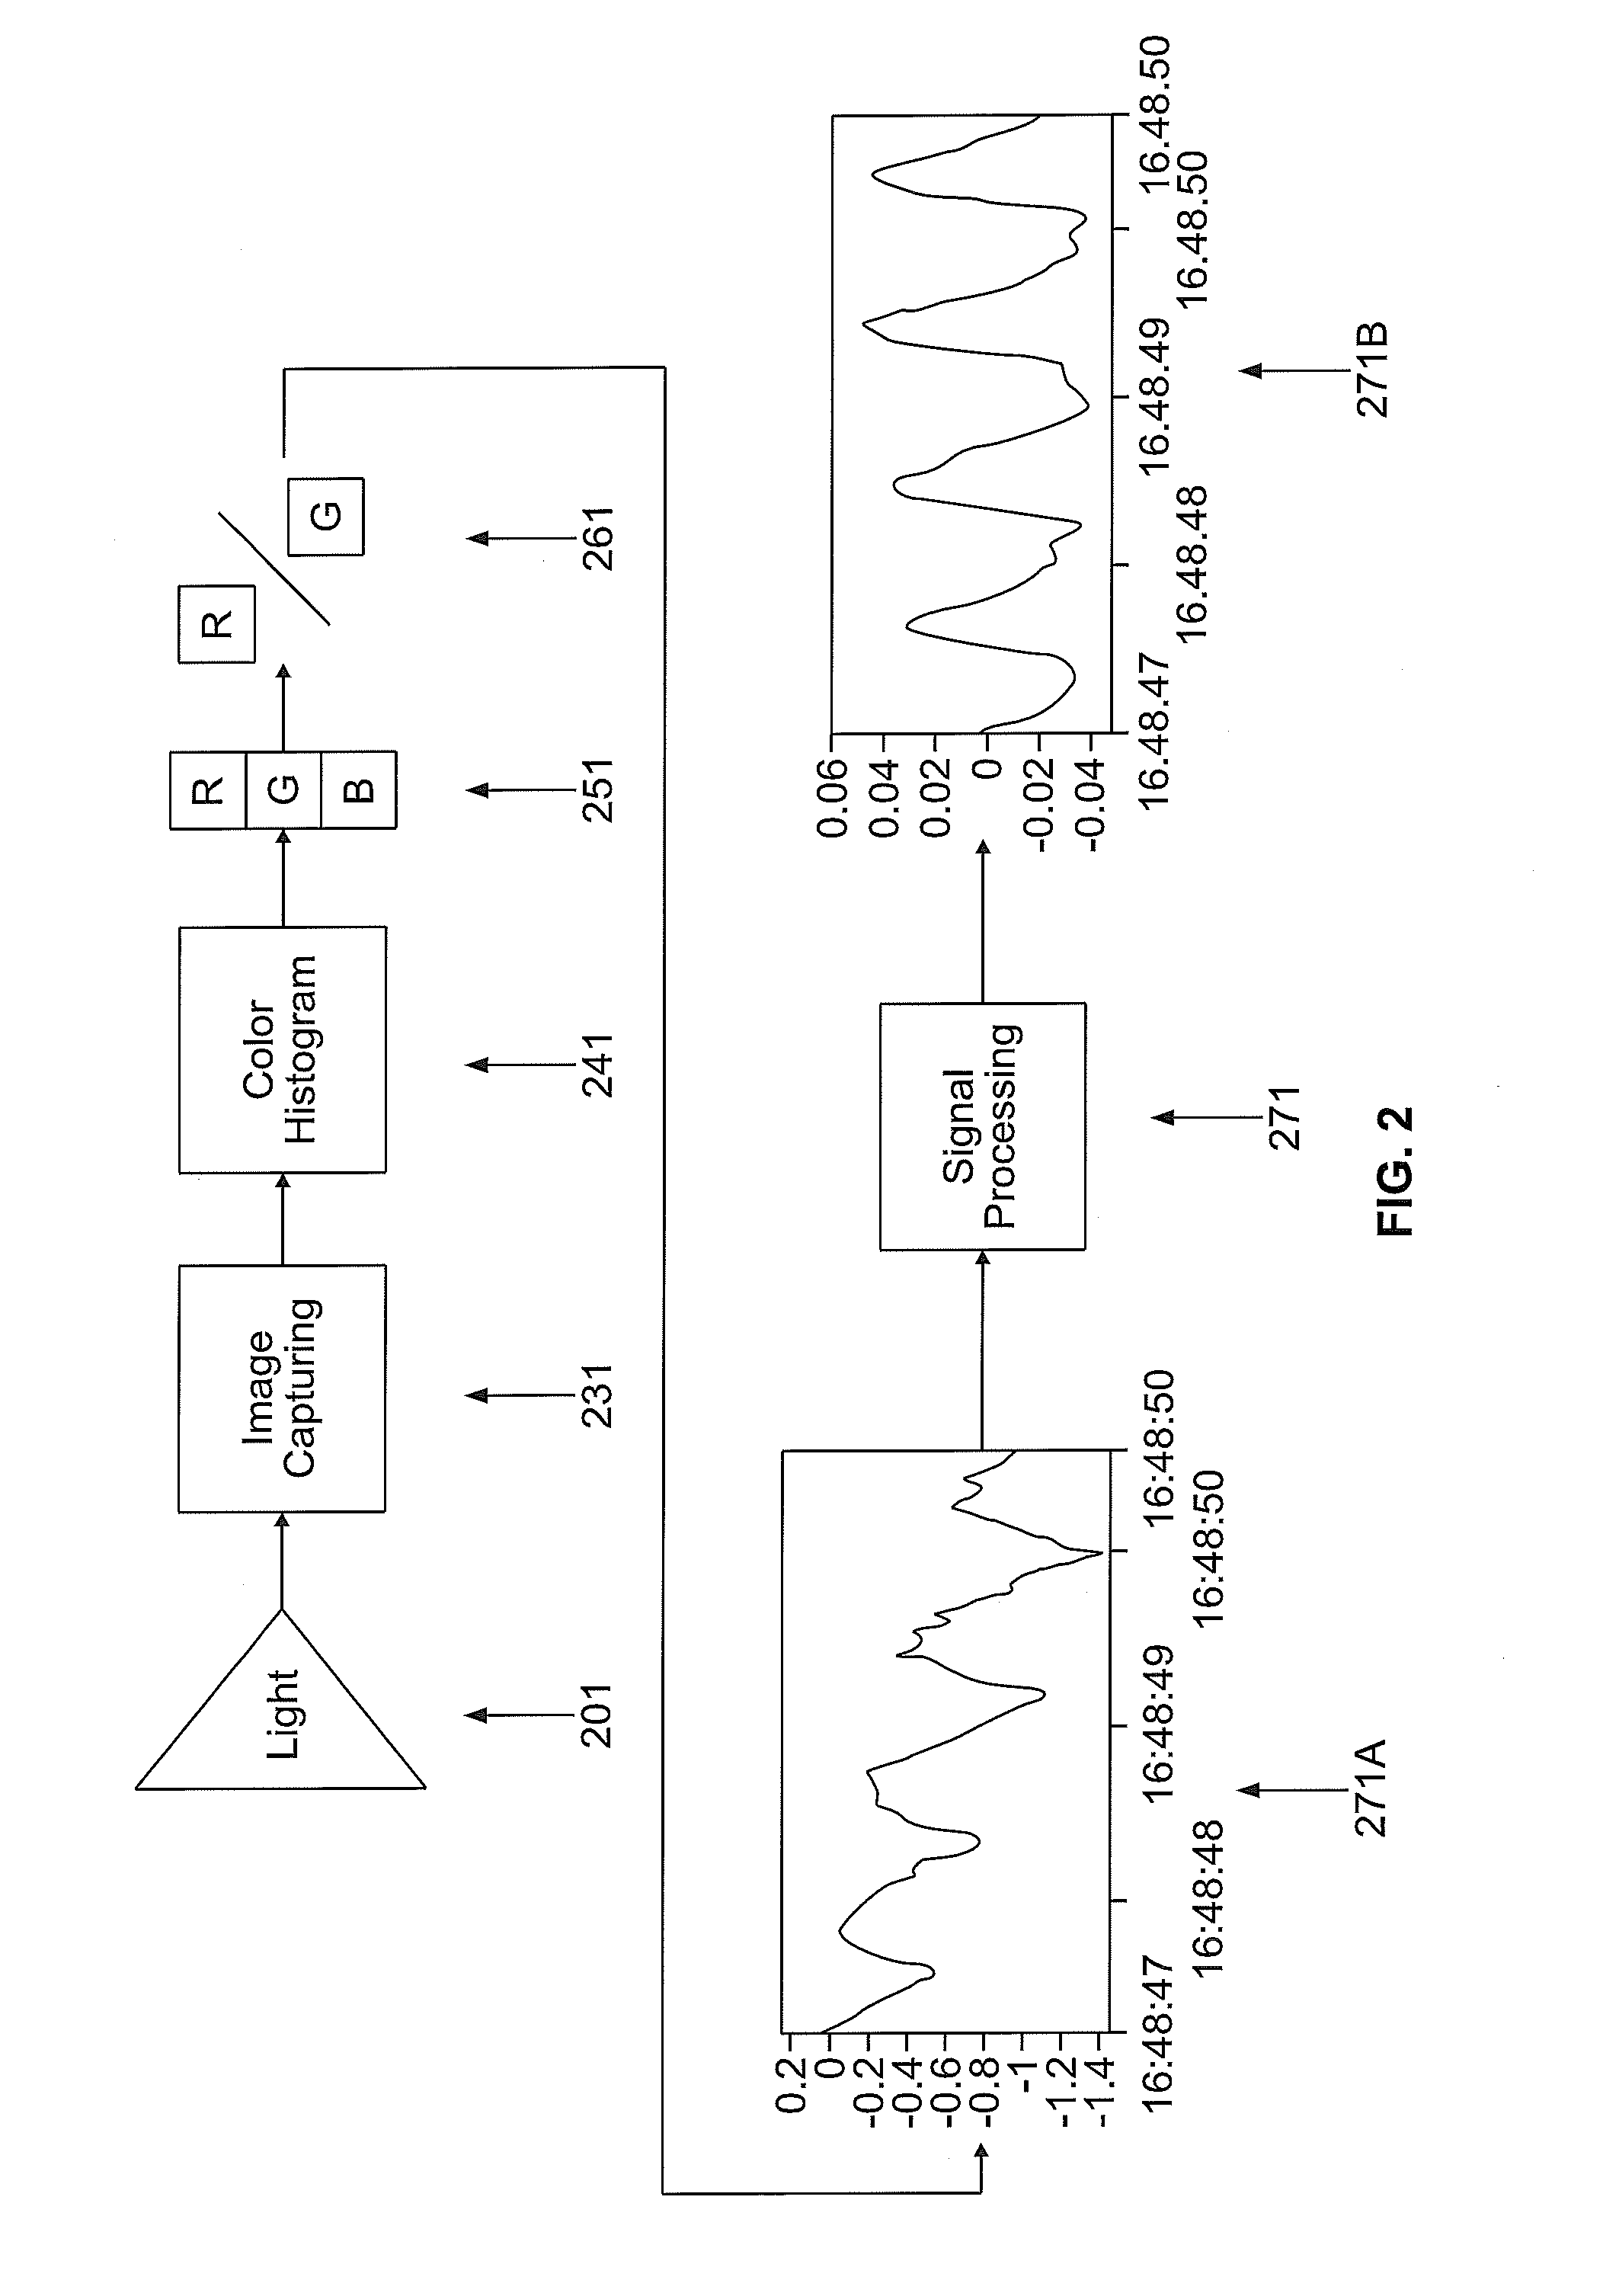 System and methods for measuring physiological parameters